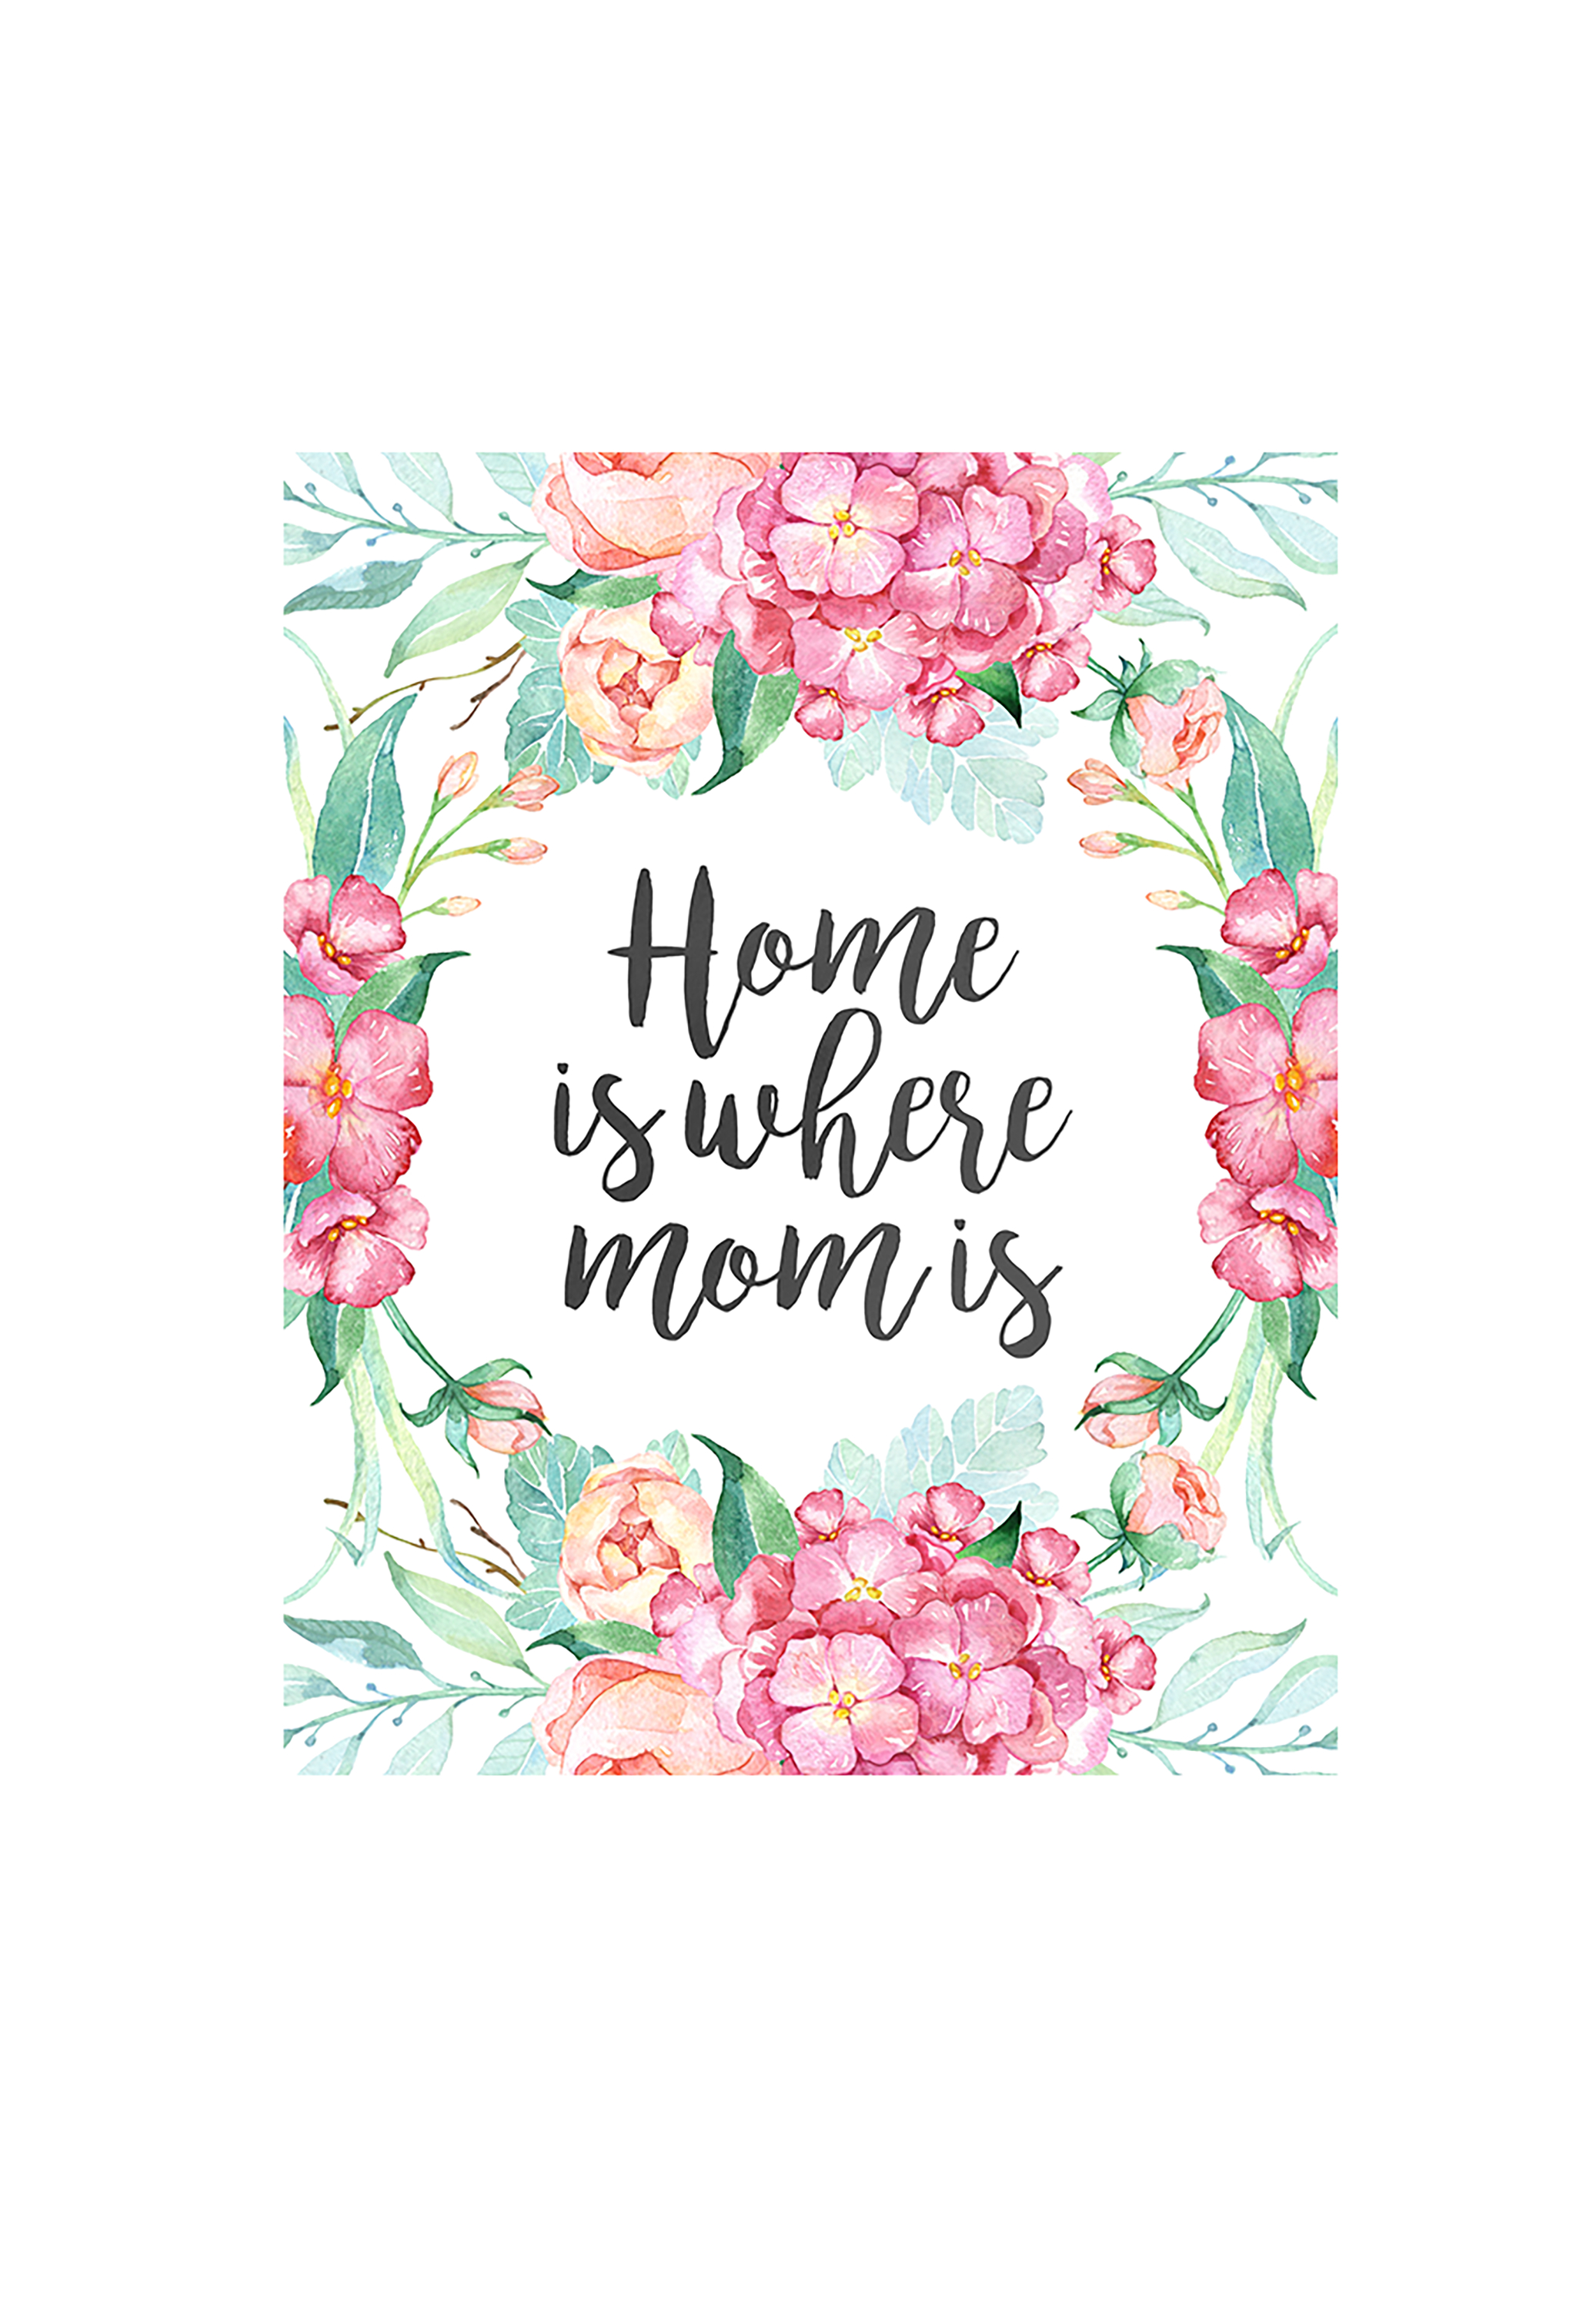 23 Mothers Day Cards - Free Printable Mother&amp;#039;s Day Cards - Free Printable Mothers Day Cards From The Dog